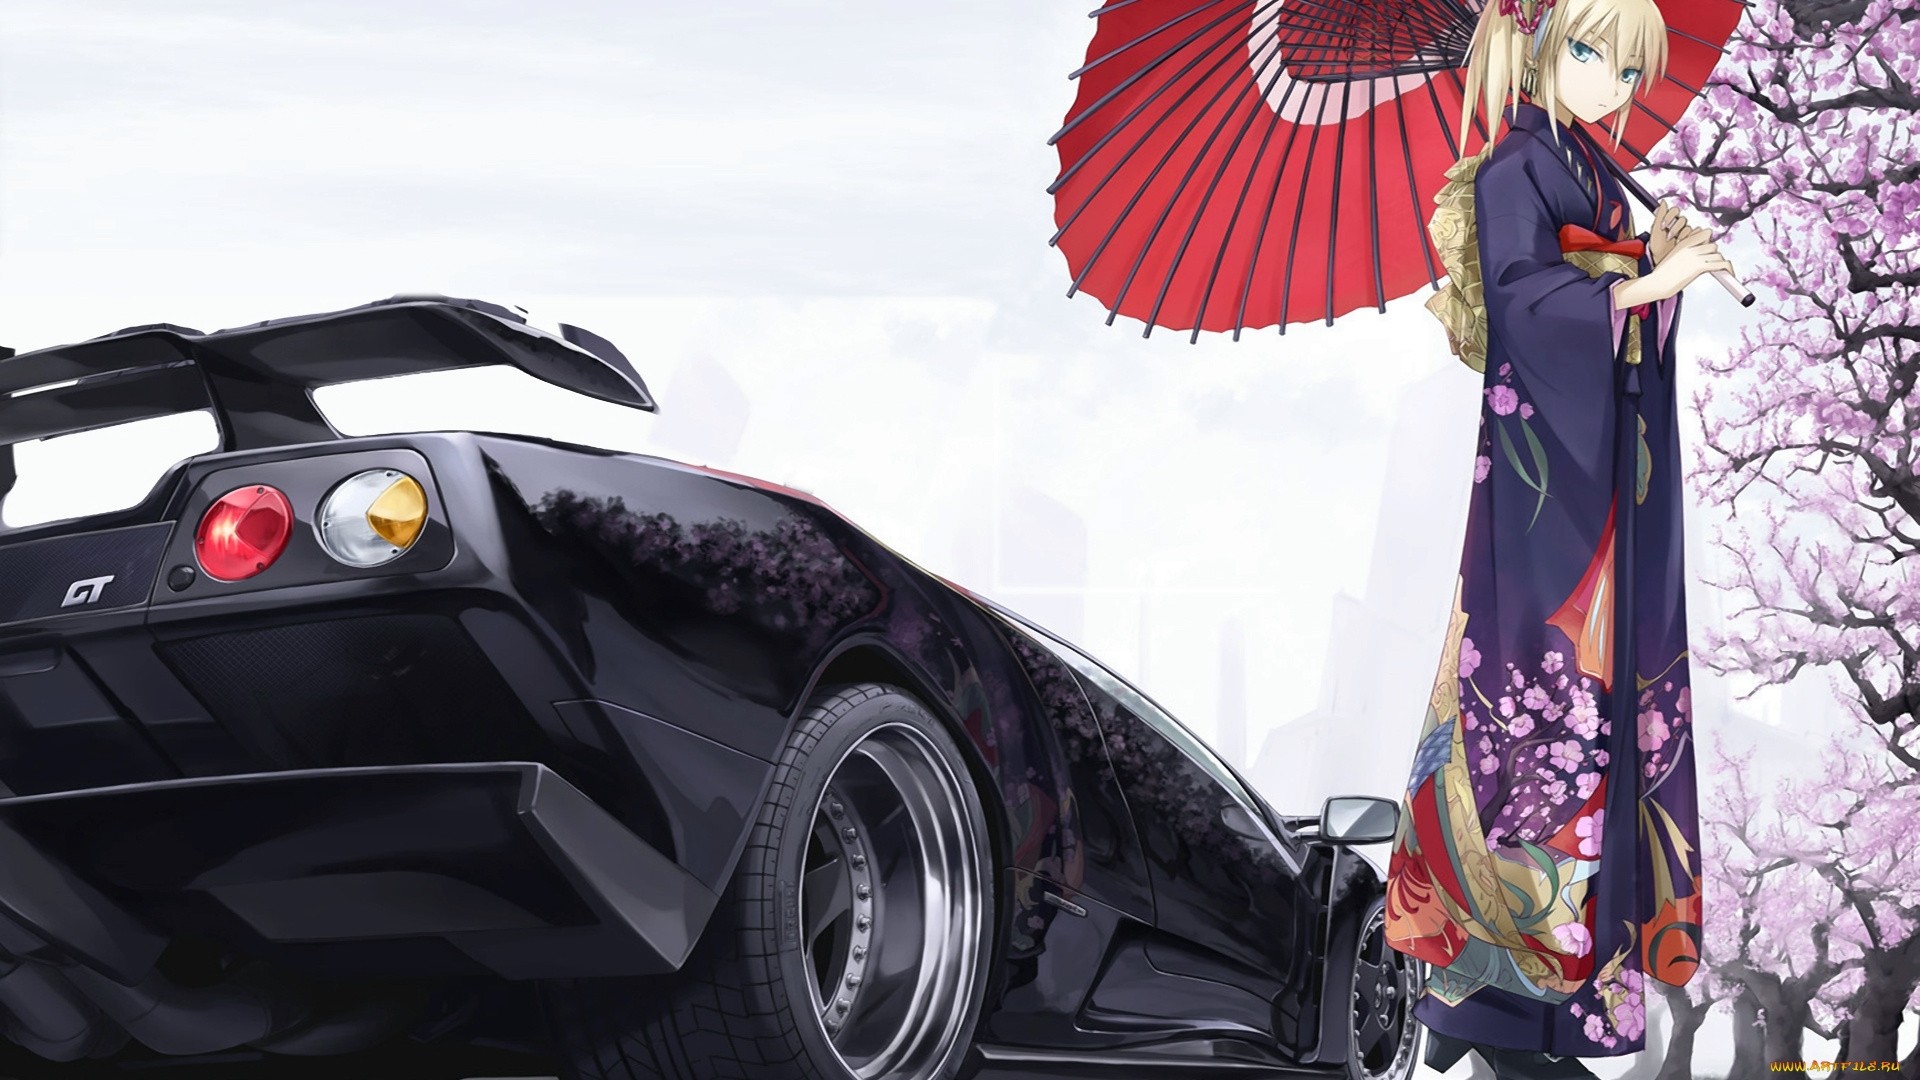 Anime Girl With Car Wallpaper Download Full